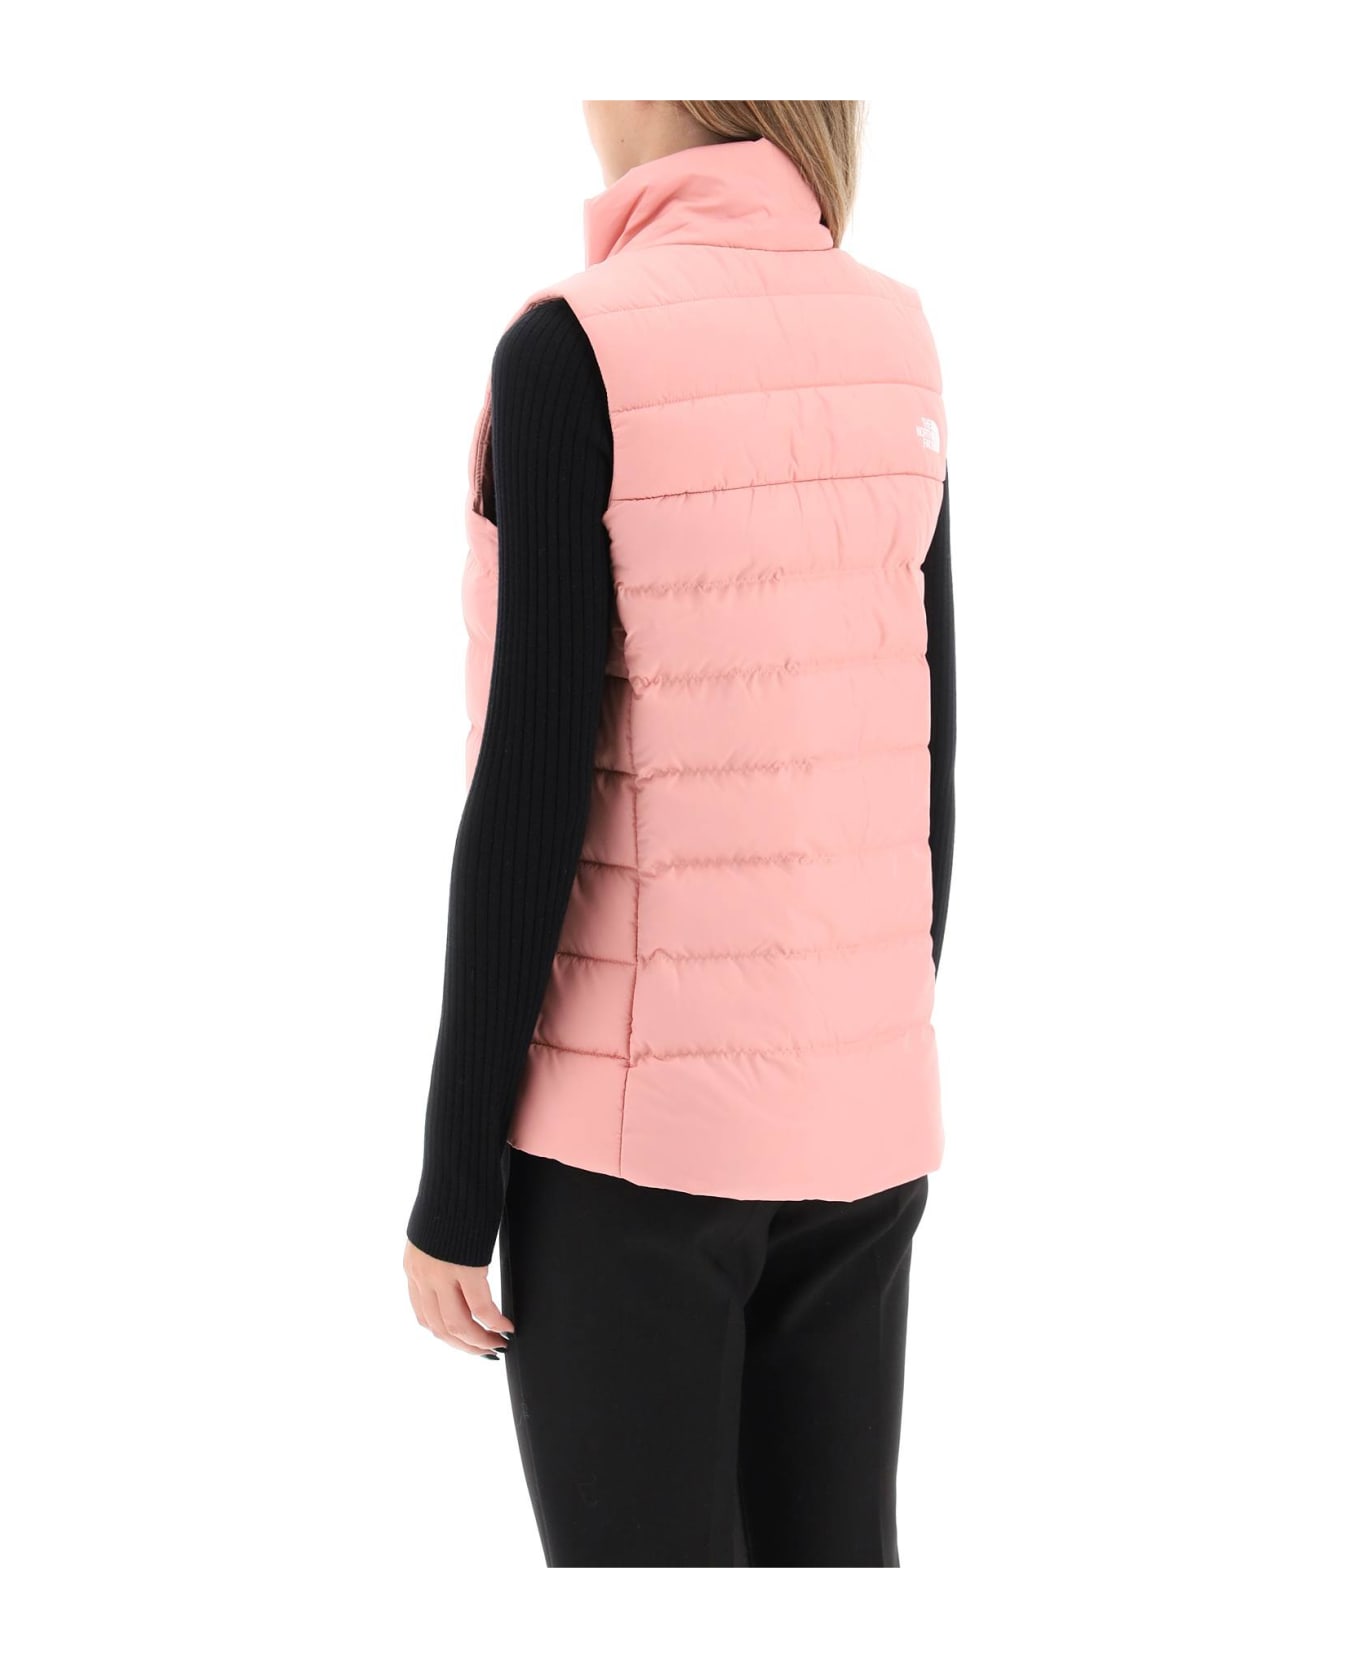 The North Face Akoncagua Lightweight Puffer Vest - SHADY ROSE (Pink) ベスト